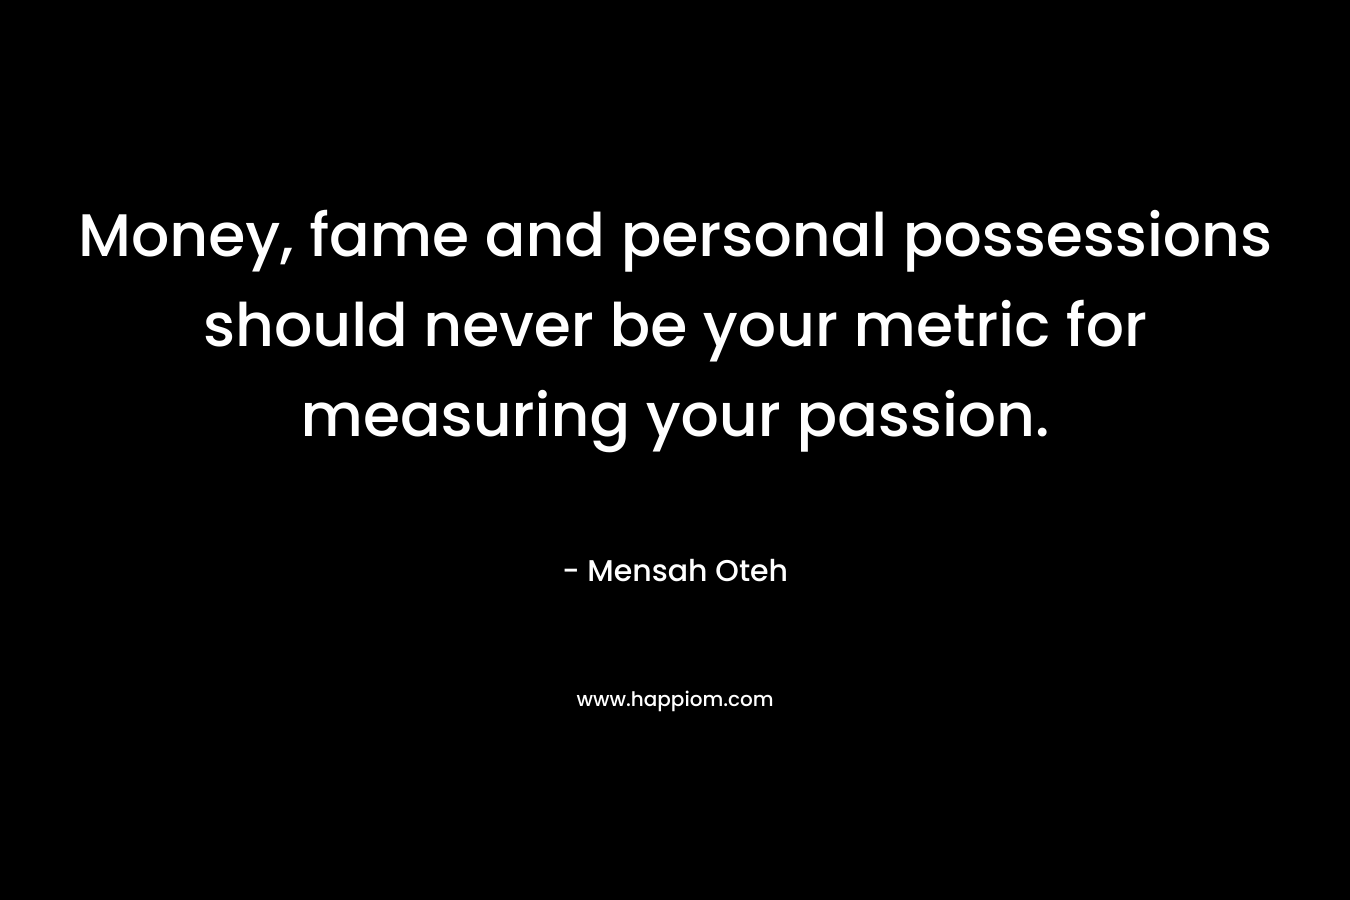 Money, fame and personal possessions should never be your metric for measuring your passion.